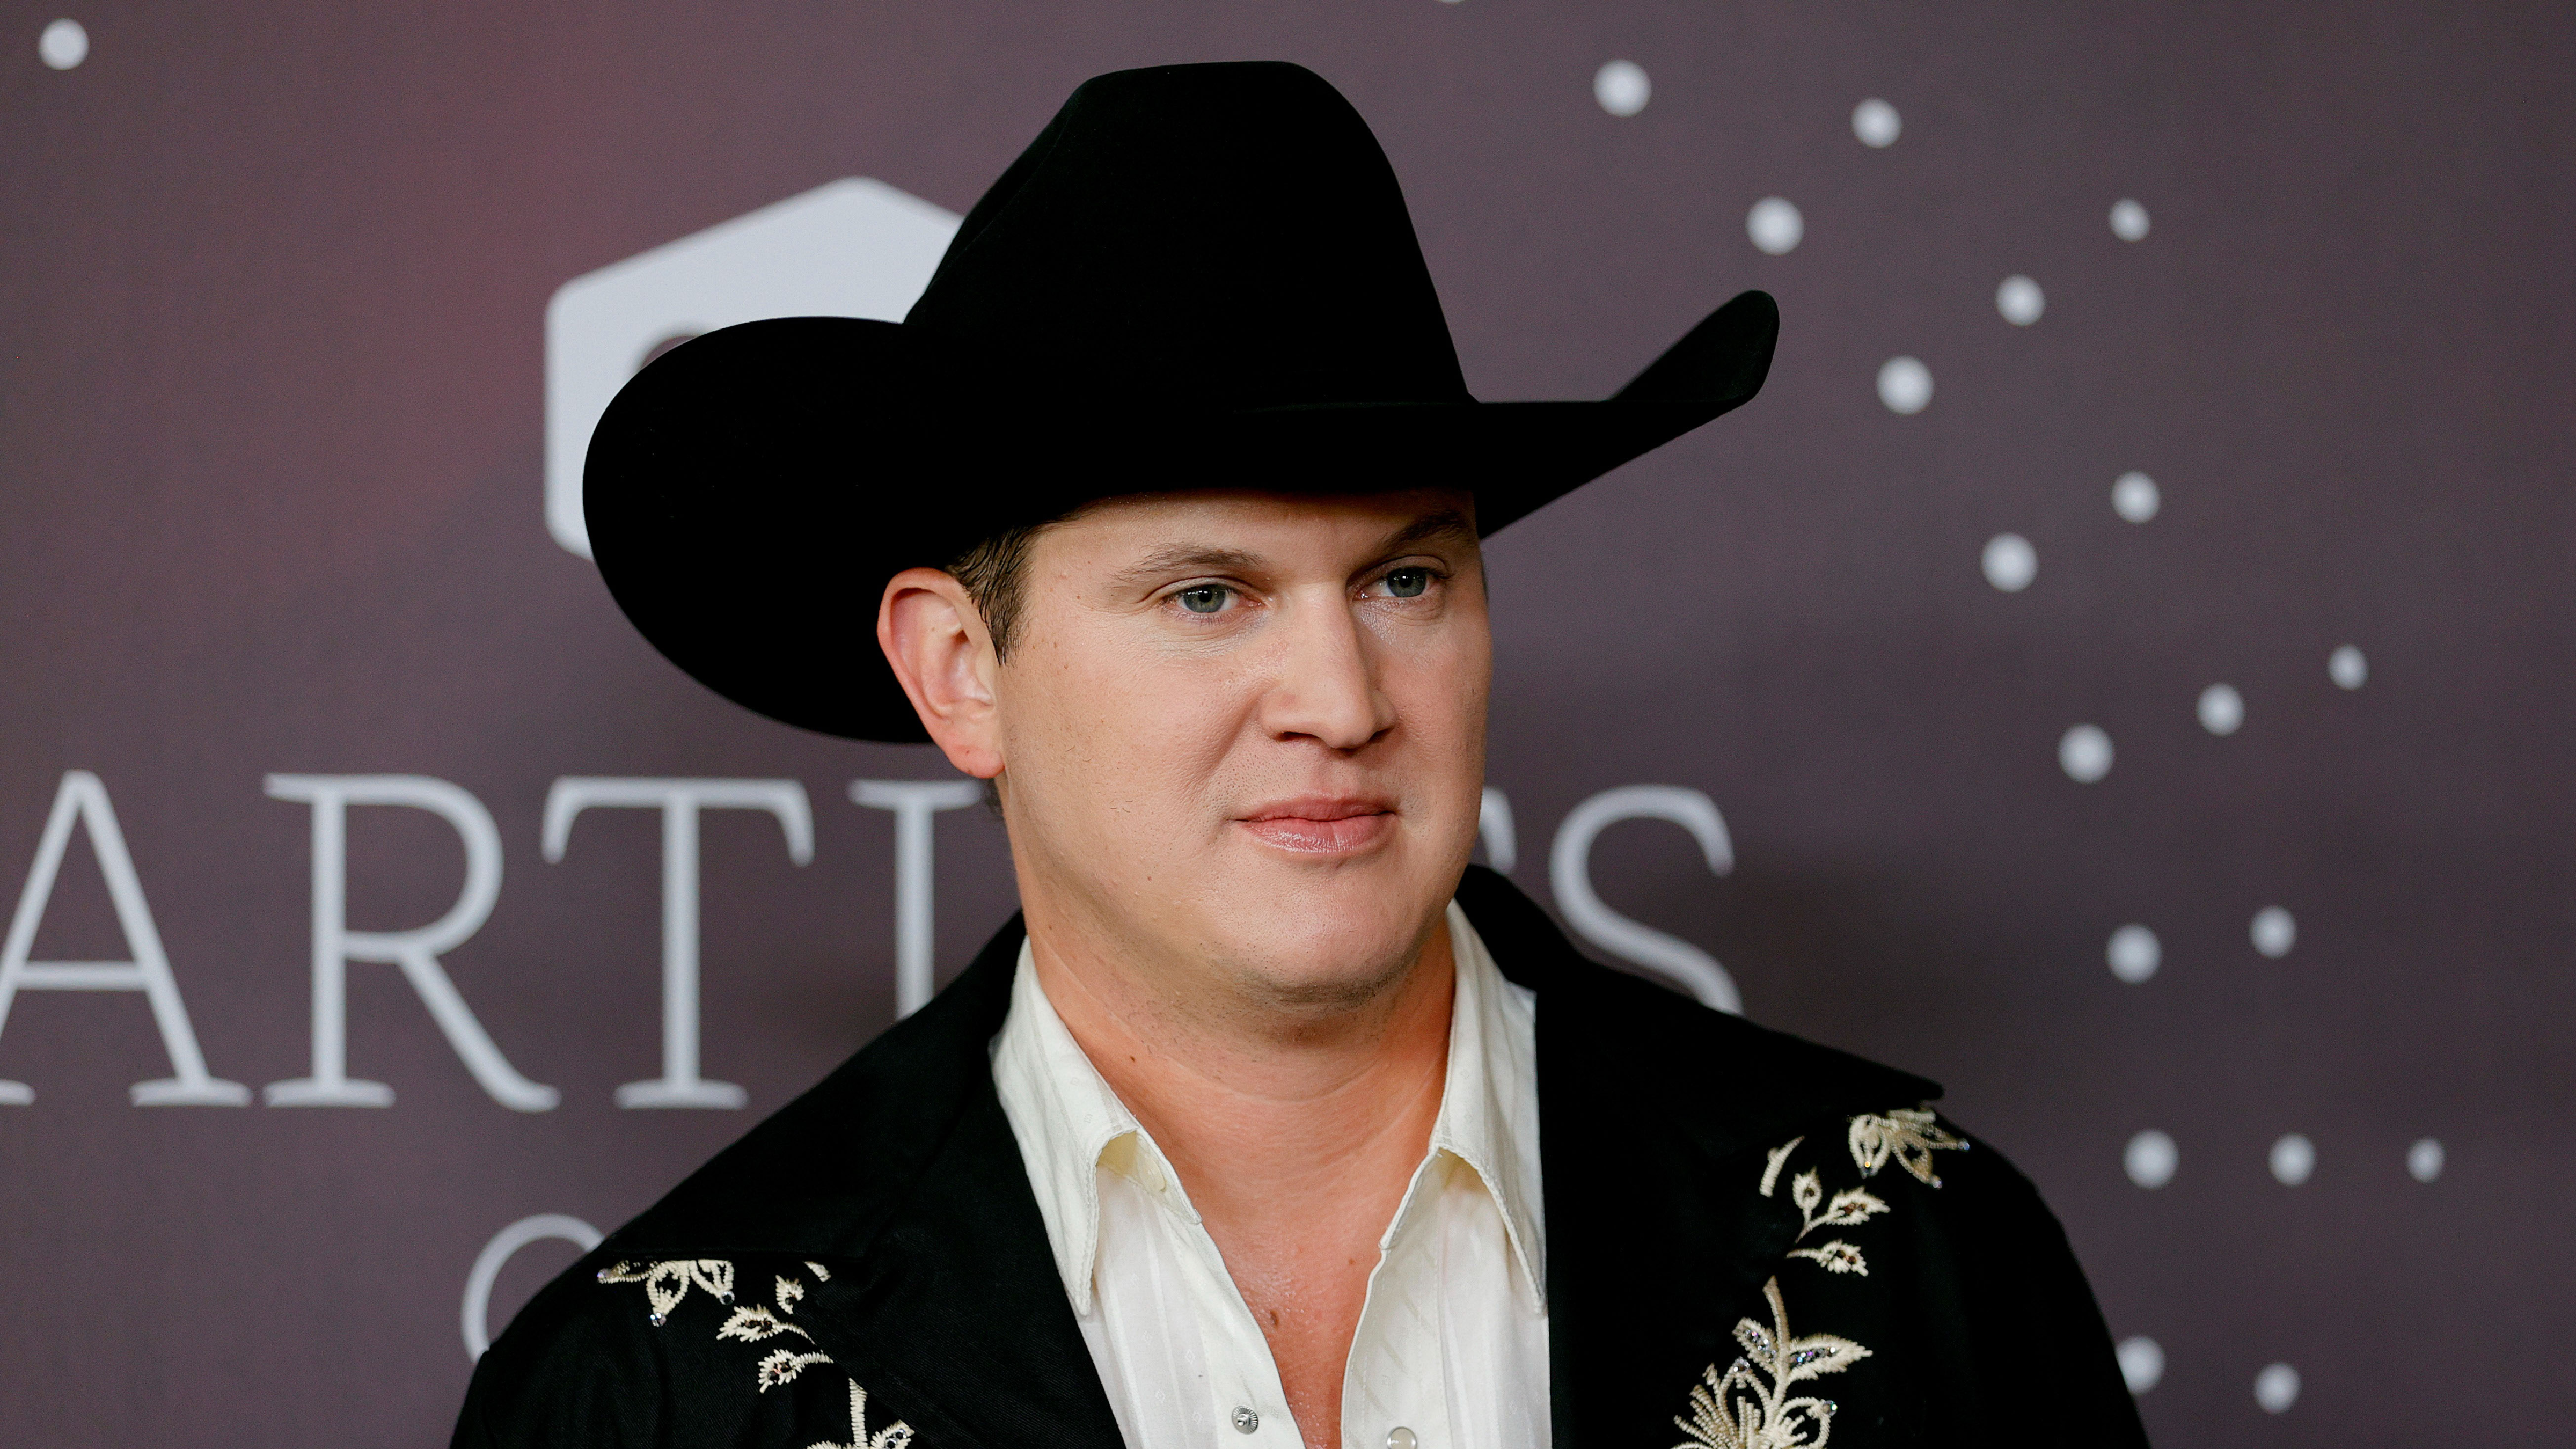 NASHVILLE, TENNESSEE - OCTOBER 13: Jon Pardi attends the 2021 CMT Artist of the Year on October 13, 2021 in Nashville, Tennessee. 